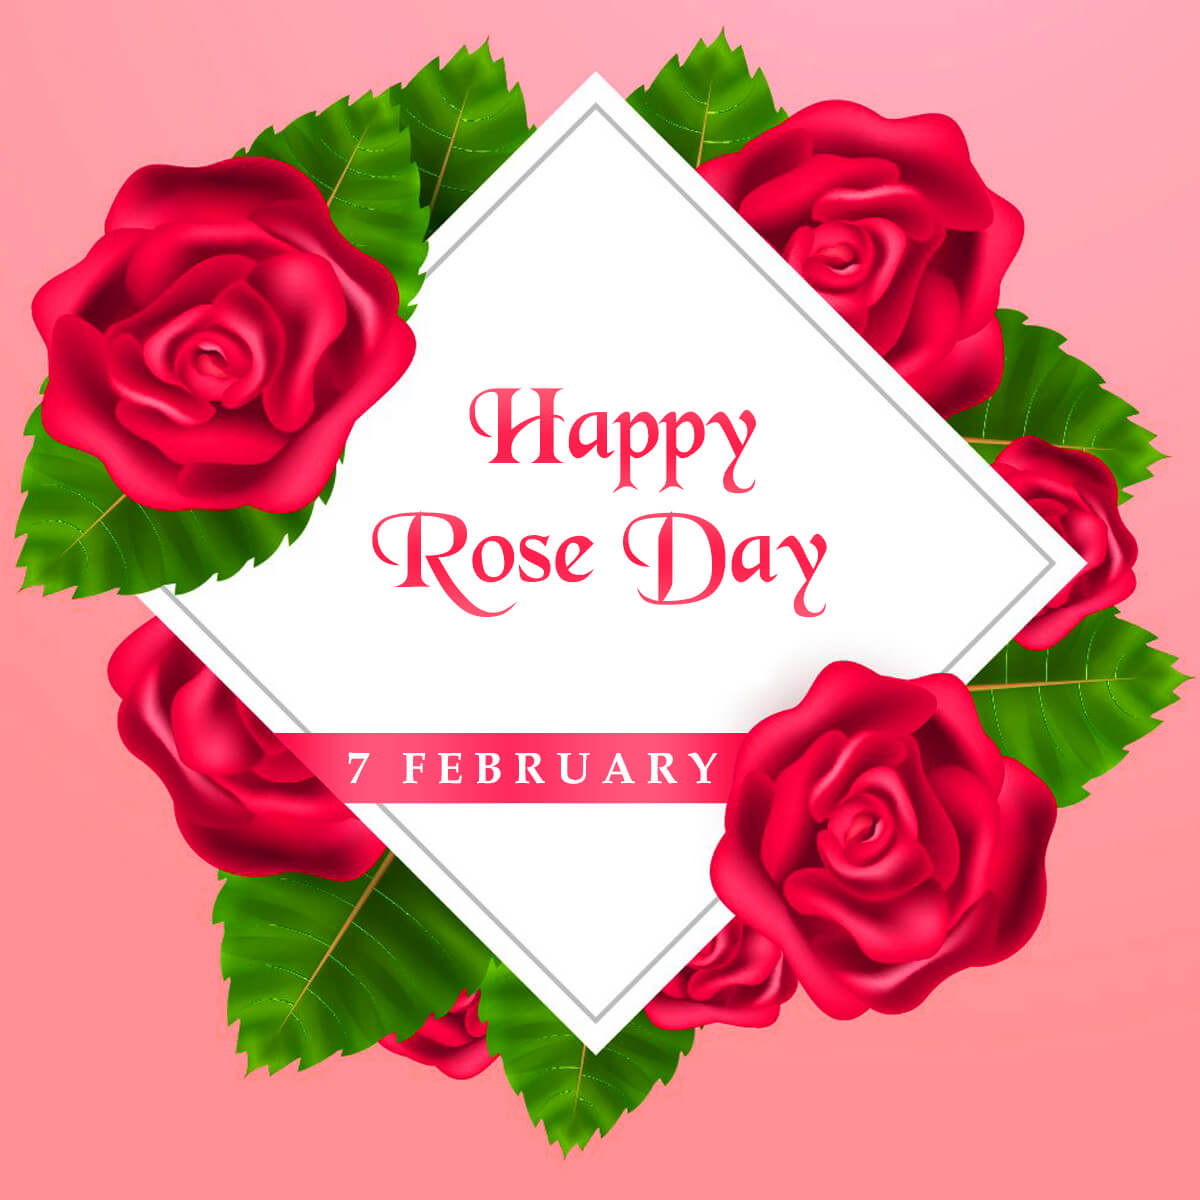 Rose day greetings card decorative flowers design - Pngfreepic